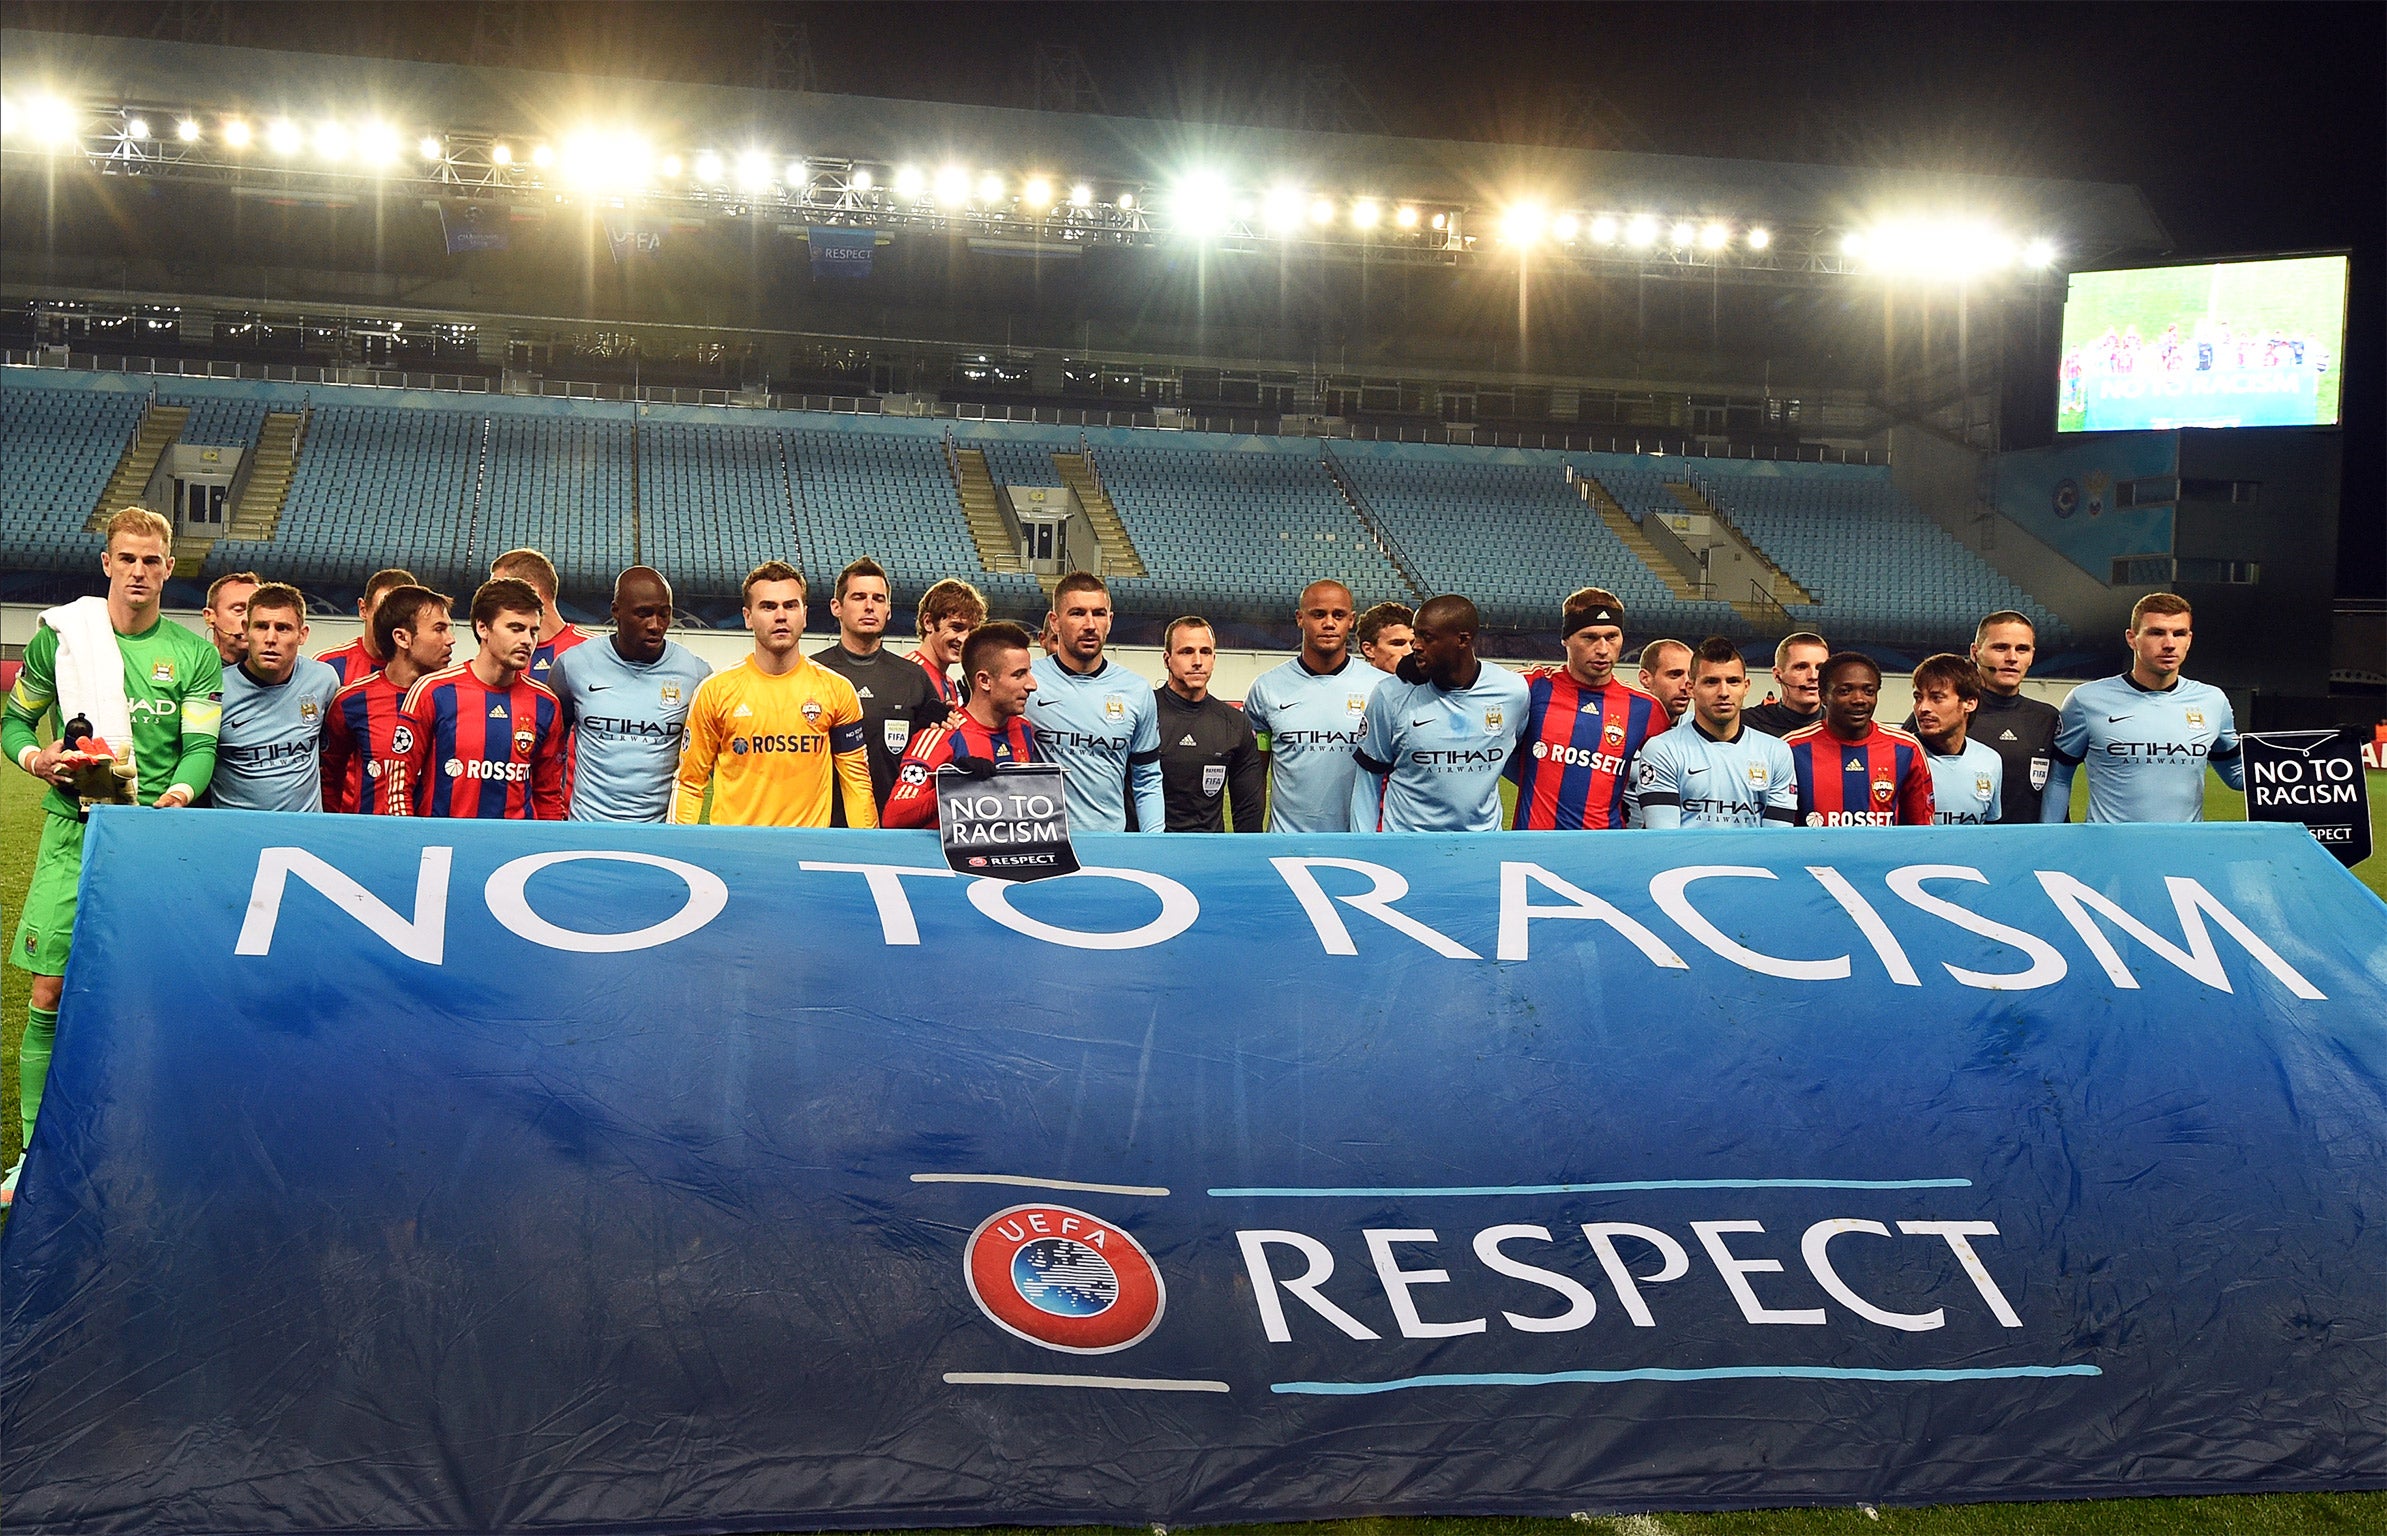 Manchester City and CSKA Moscow players stand behind a banner in support of UEFA's anti-racism campaign before their Champions League match - which was played in front of empty stands - in Russia earlier this month